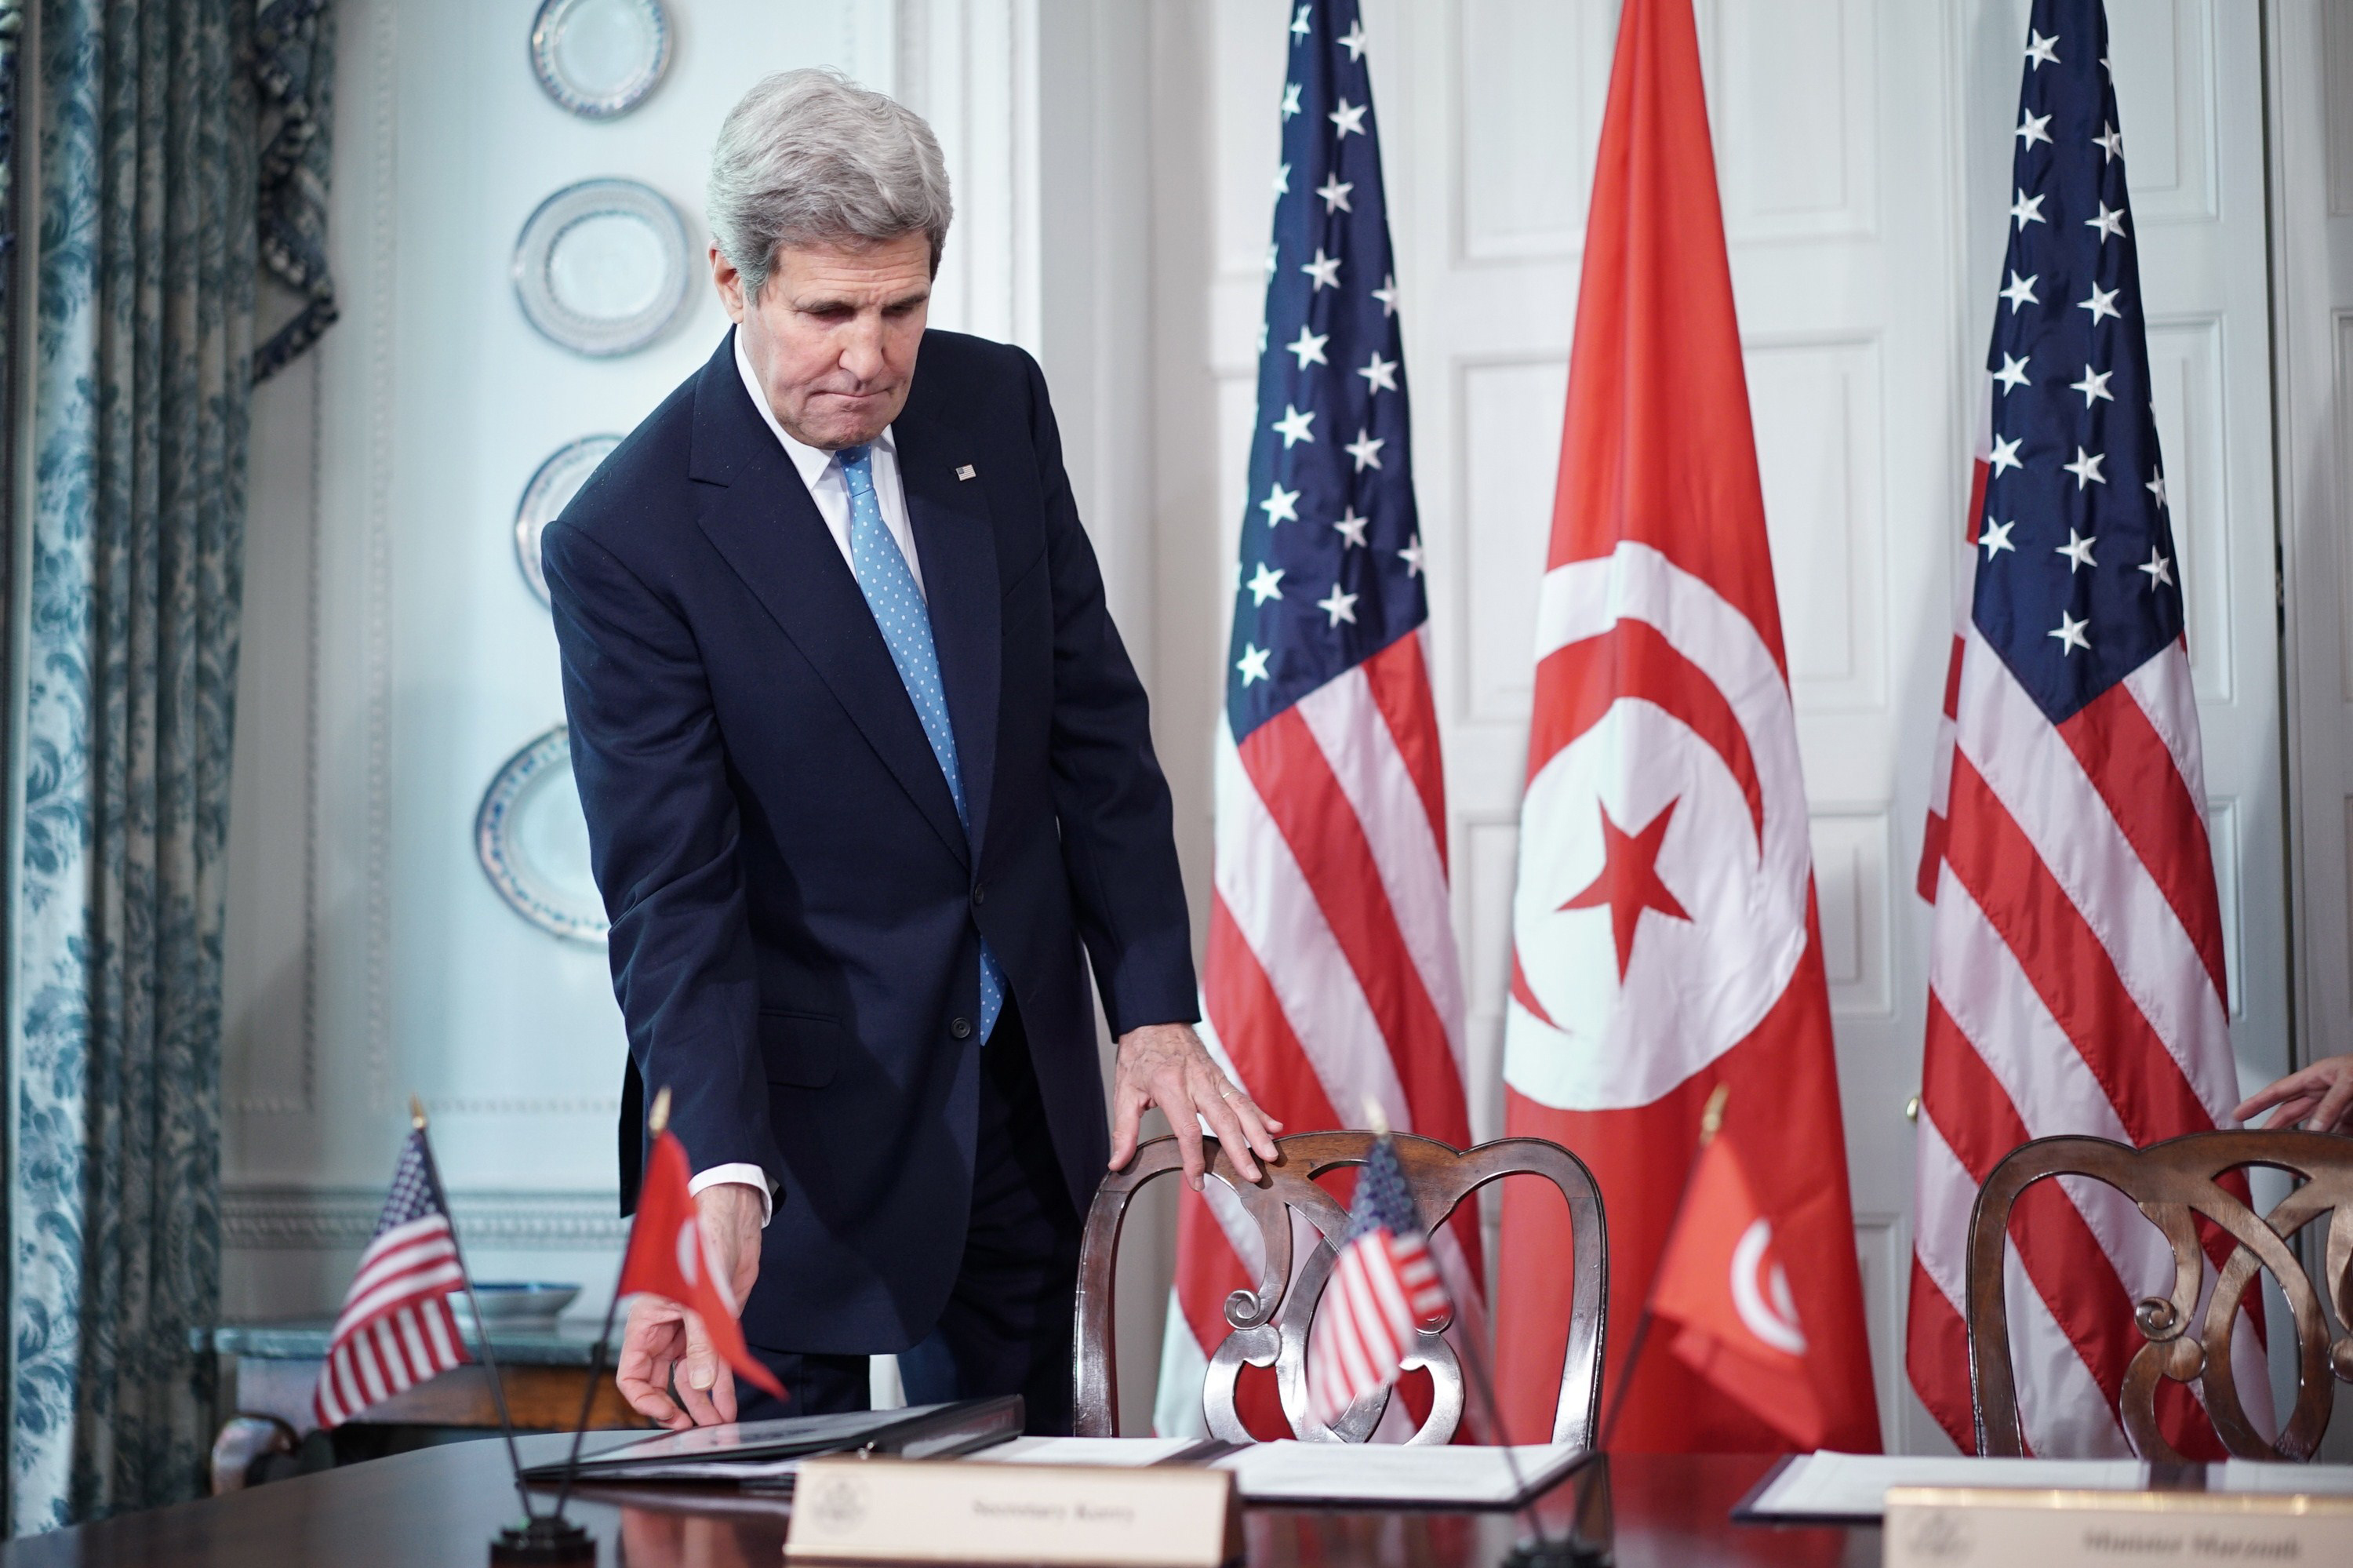 US Secretary of State John Kerry arrives for a signing ceremony for a memorandum of understanding with Tunisian Minister of Political Affairs Mohsen Marzouk at Blair House, the presidential guest house, on May 20, 2015 in Washington, DC. (Mandel Ngan—AFP/Getty Images)